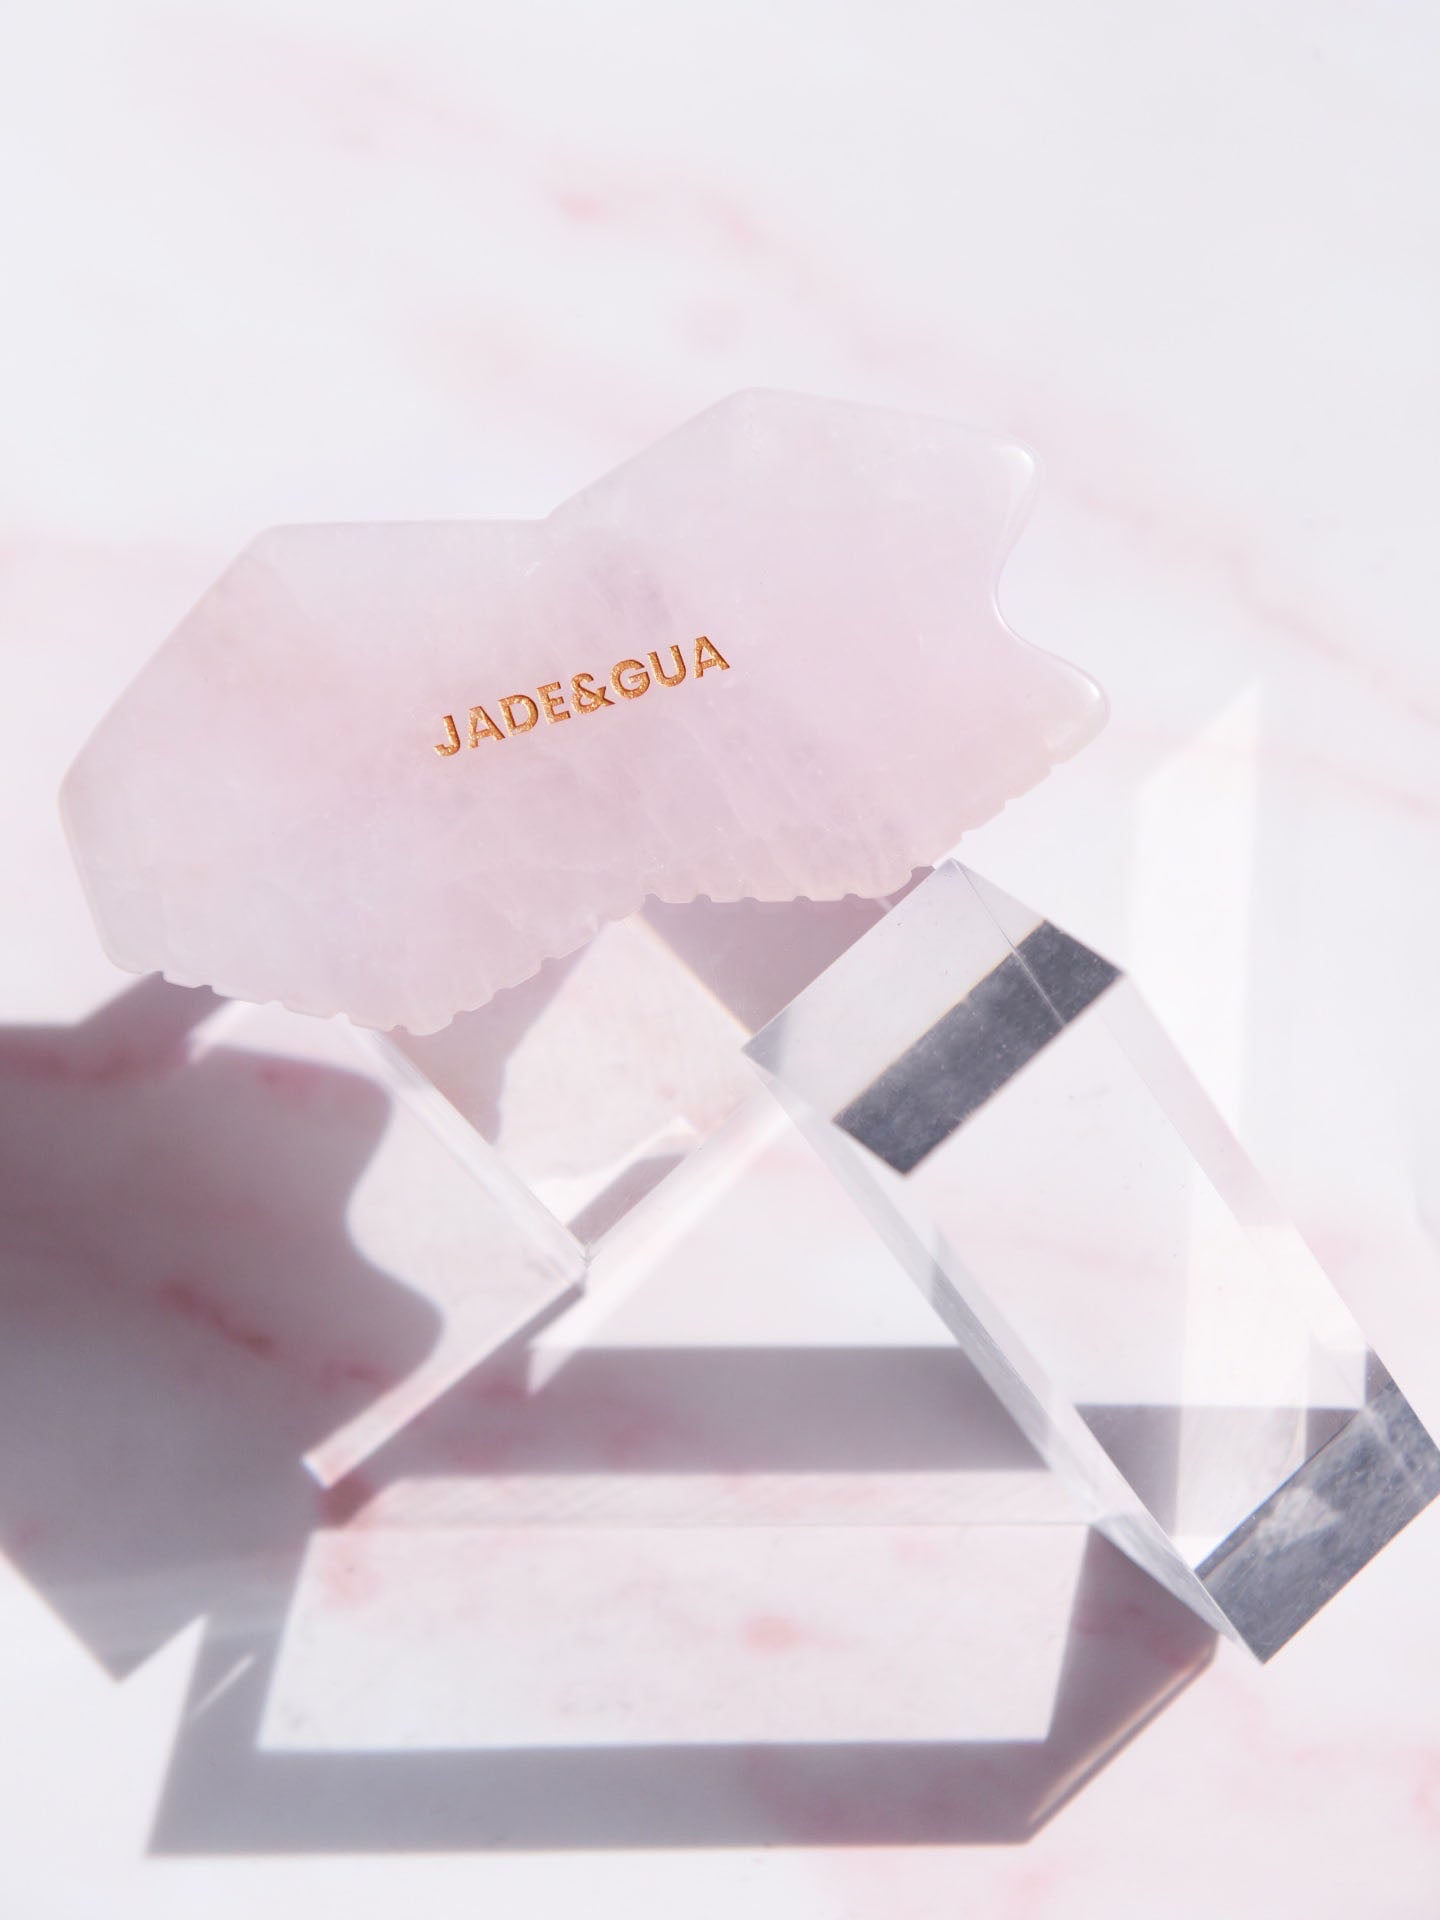  Multi Side Rose Quartz Comb by Jade and Gua Jade and Gua Perfumarie